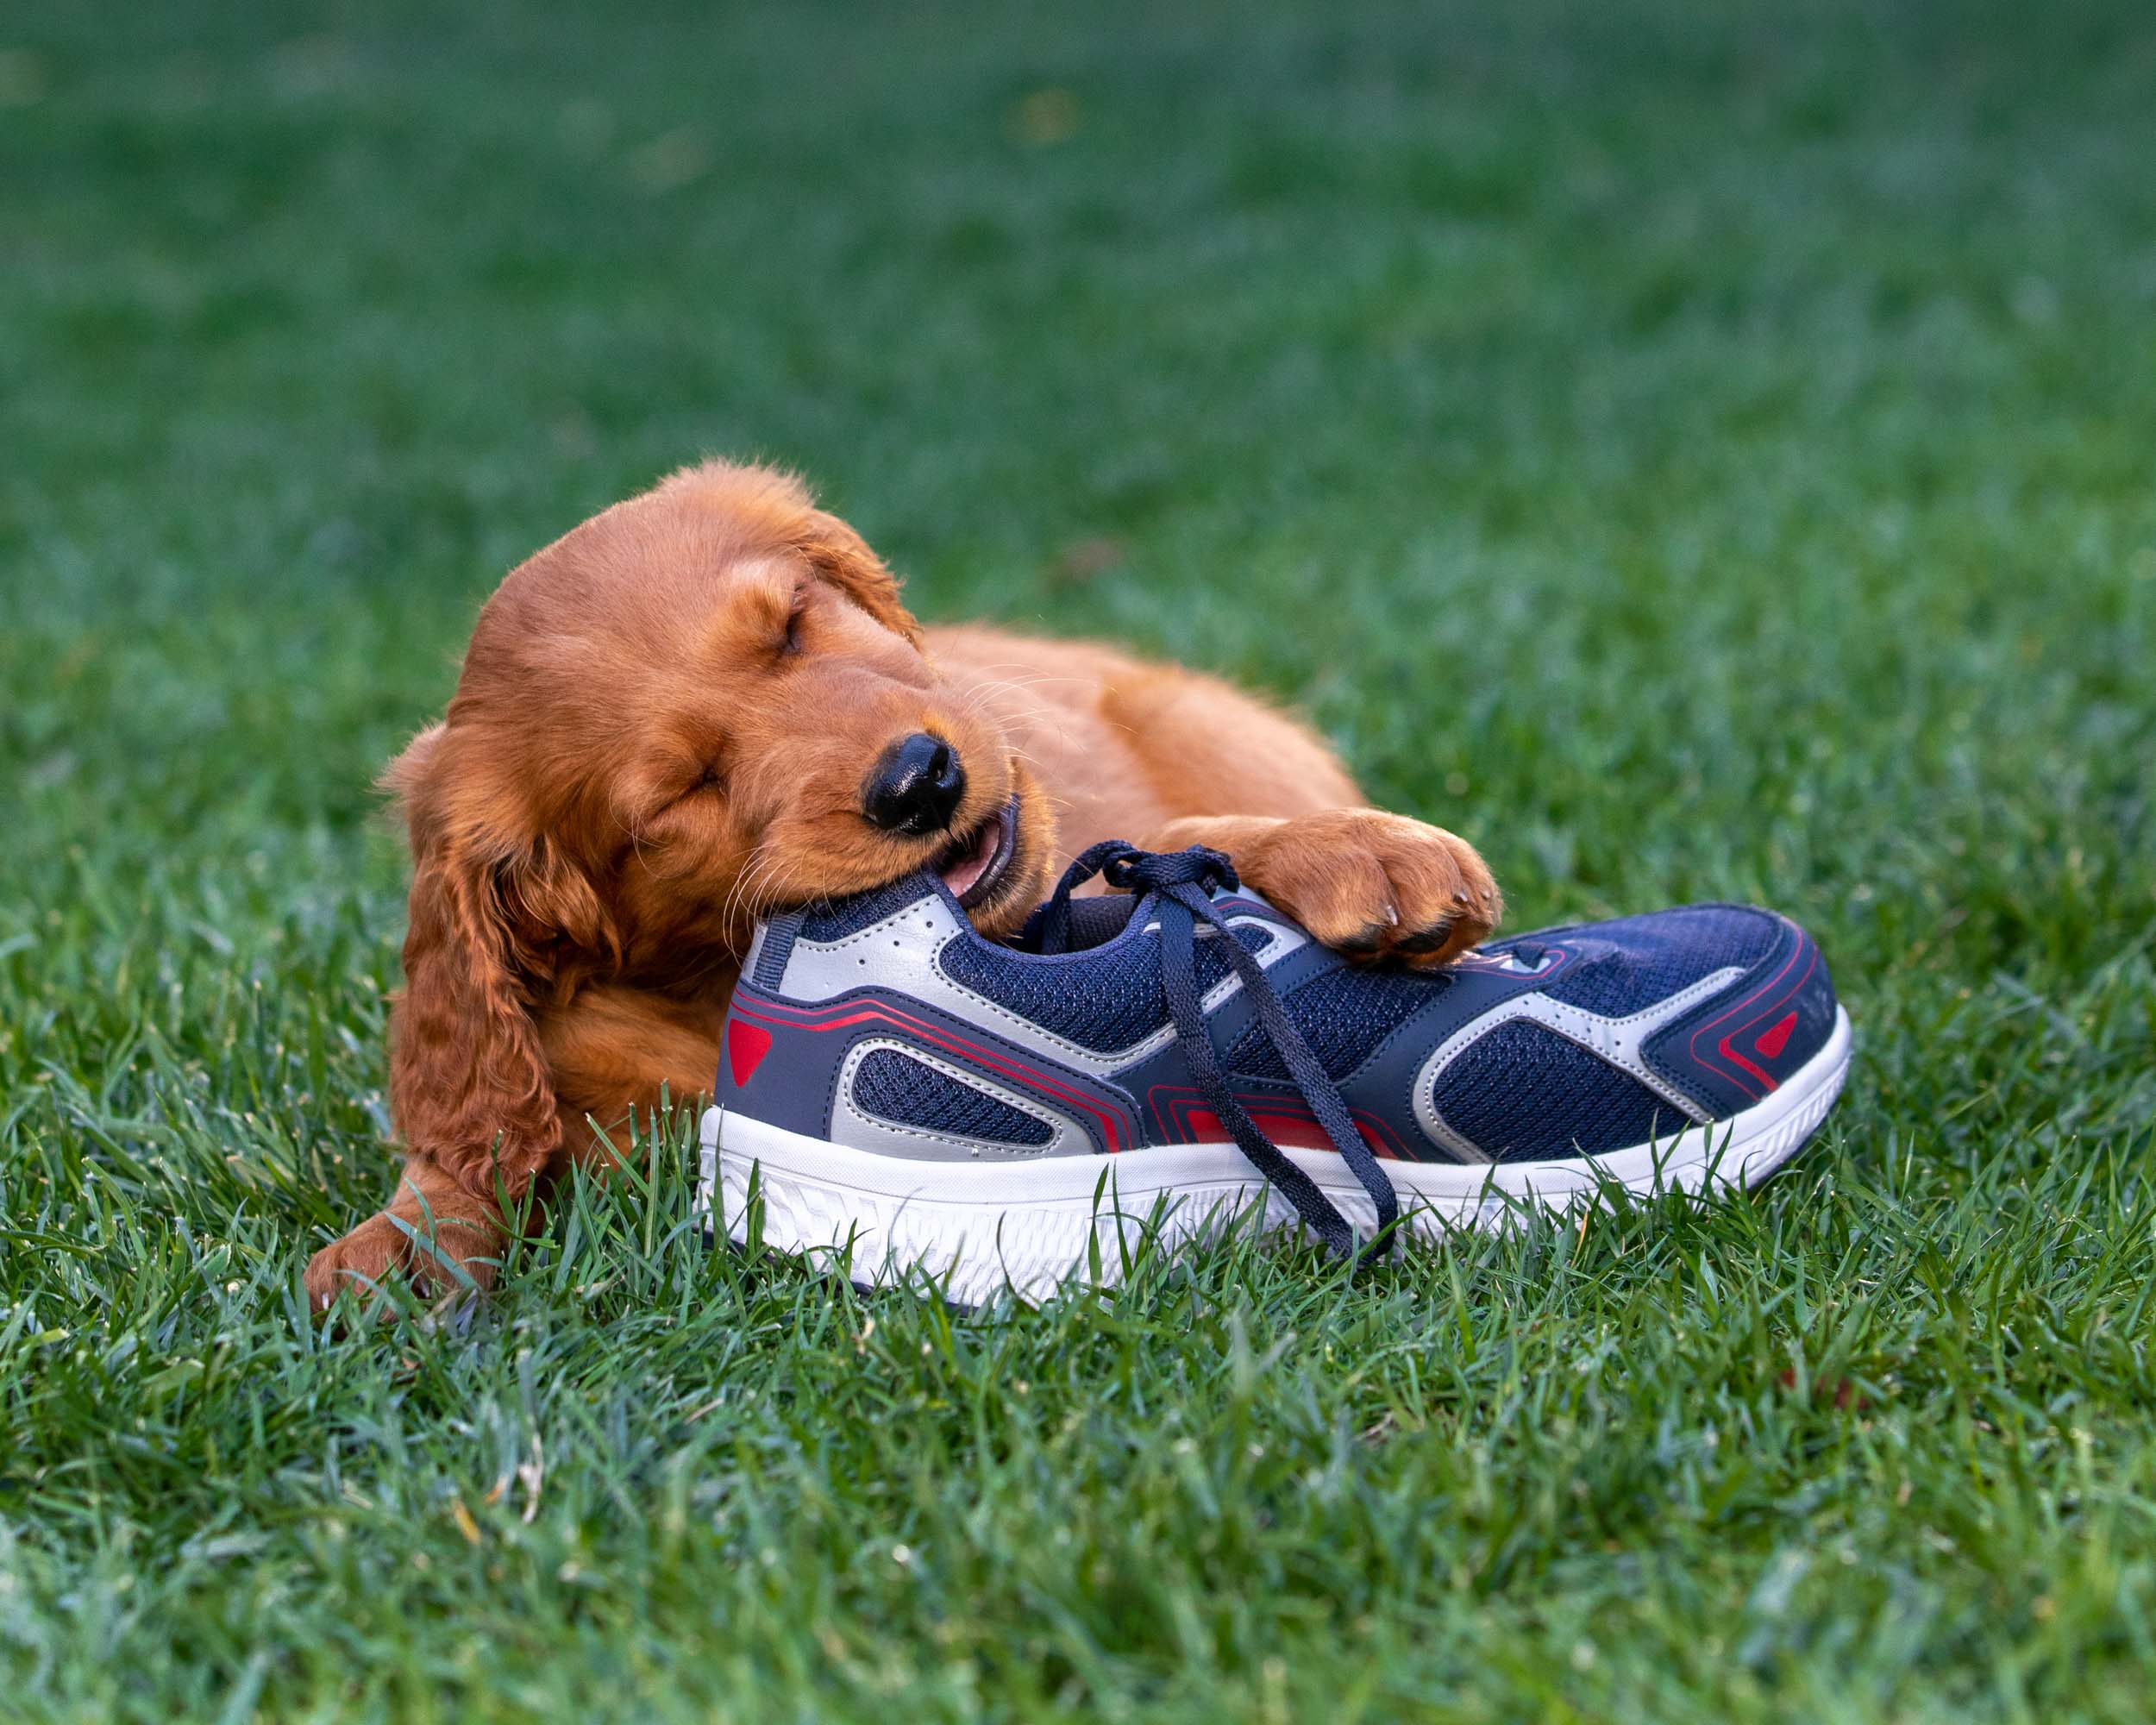 red-puppy-chewing-on-shoe-in-yard-6702